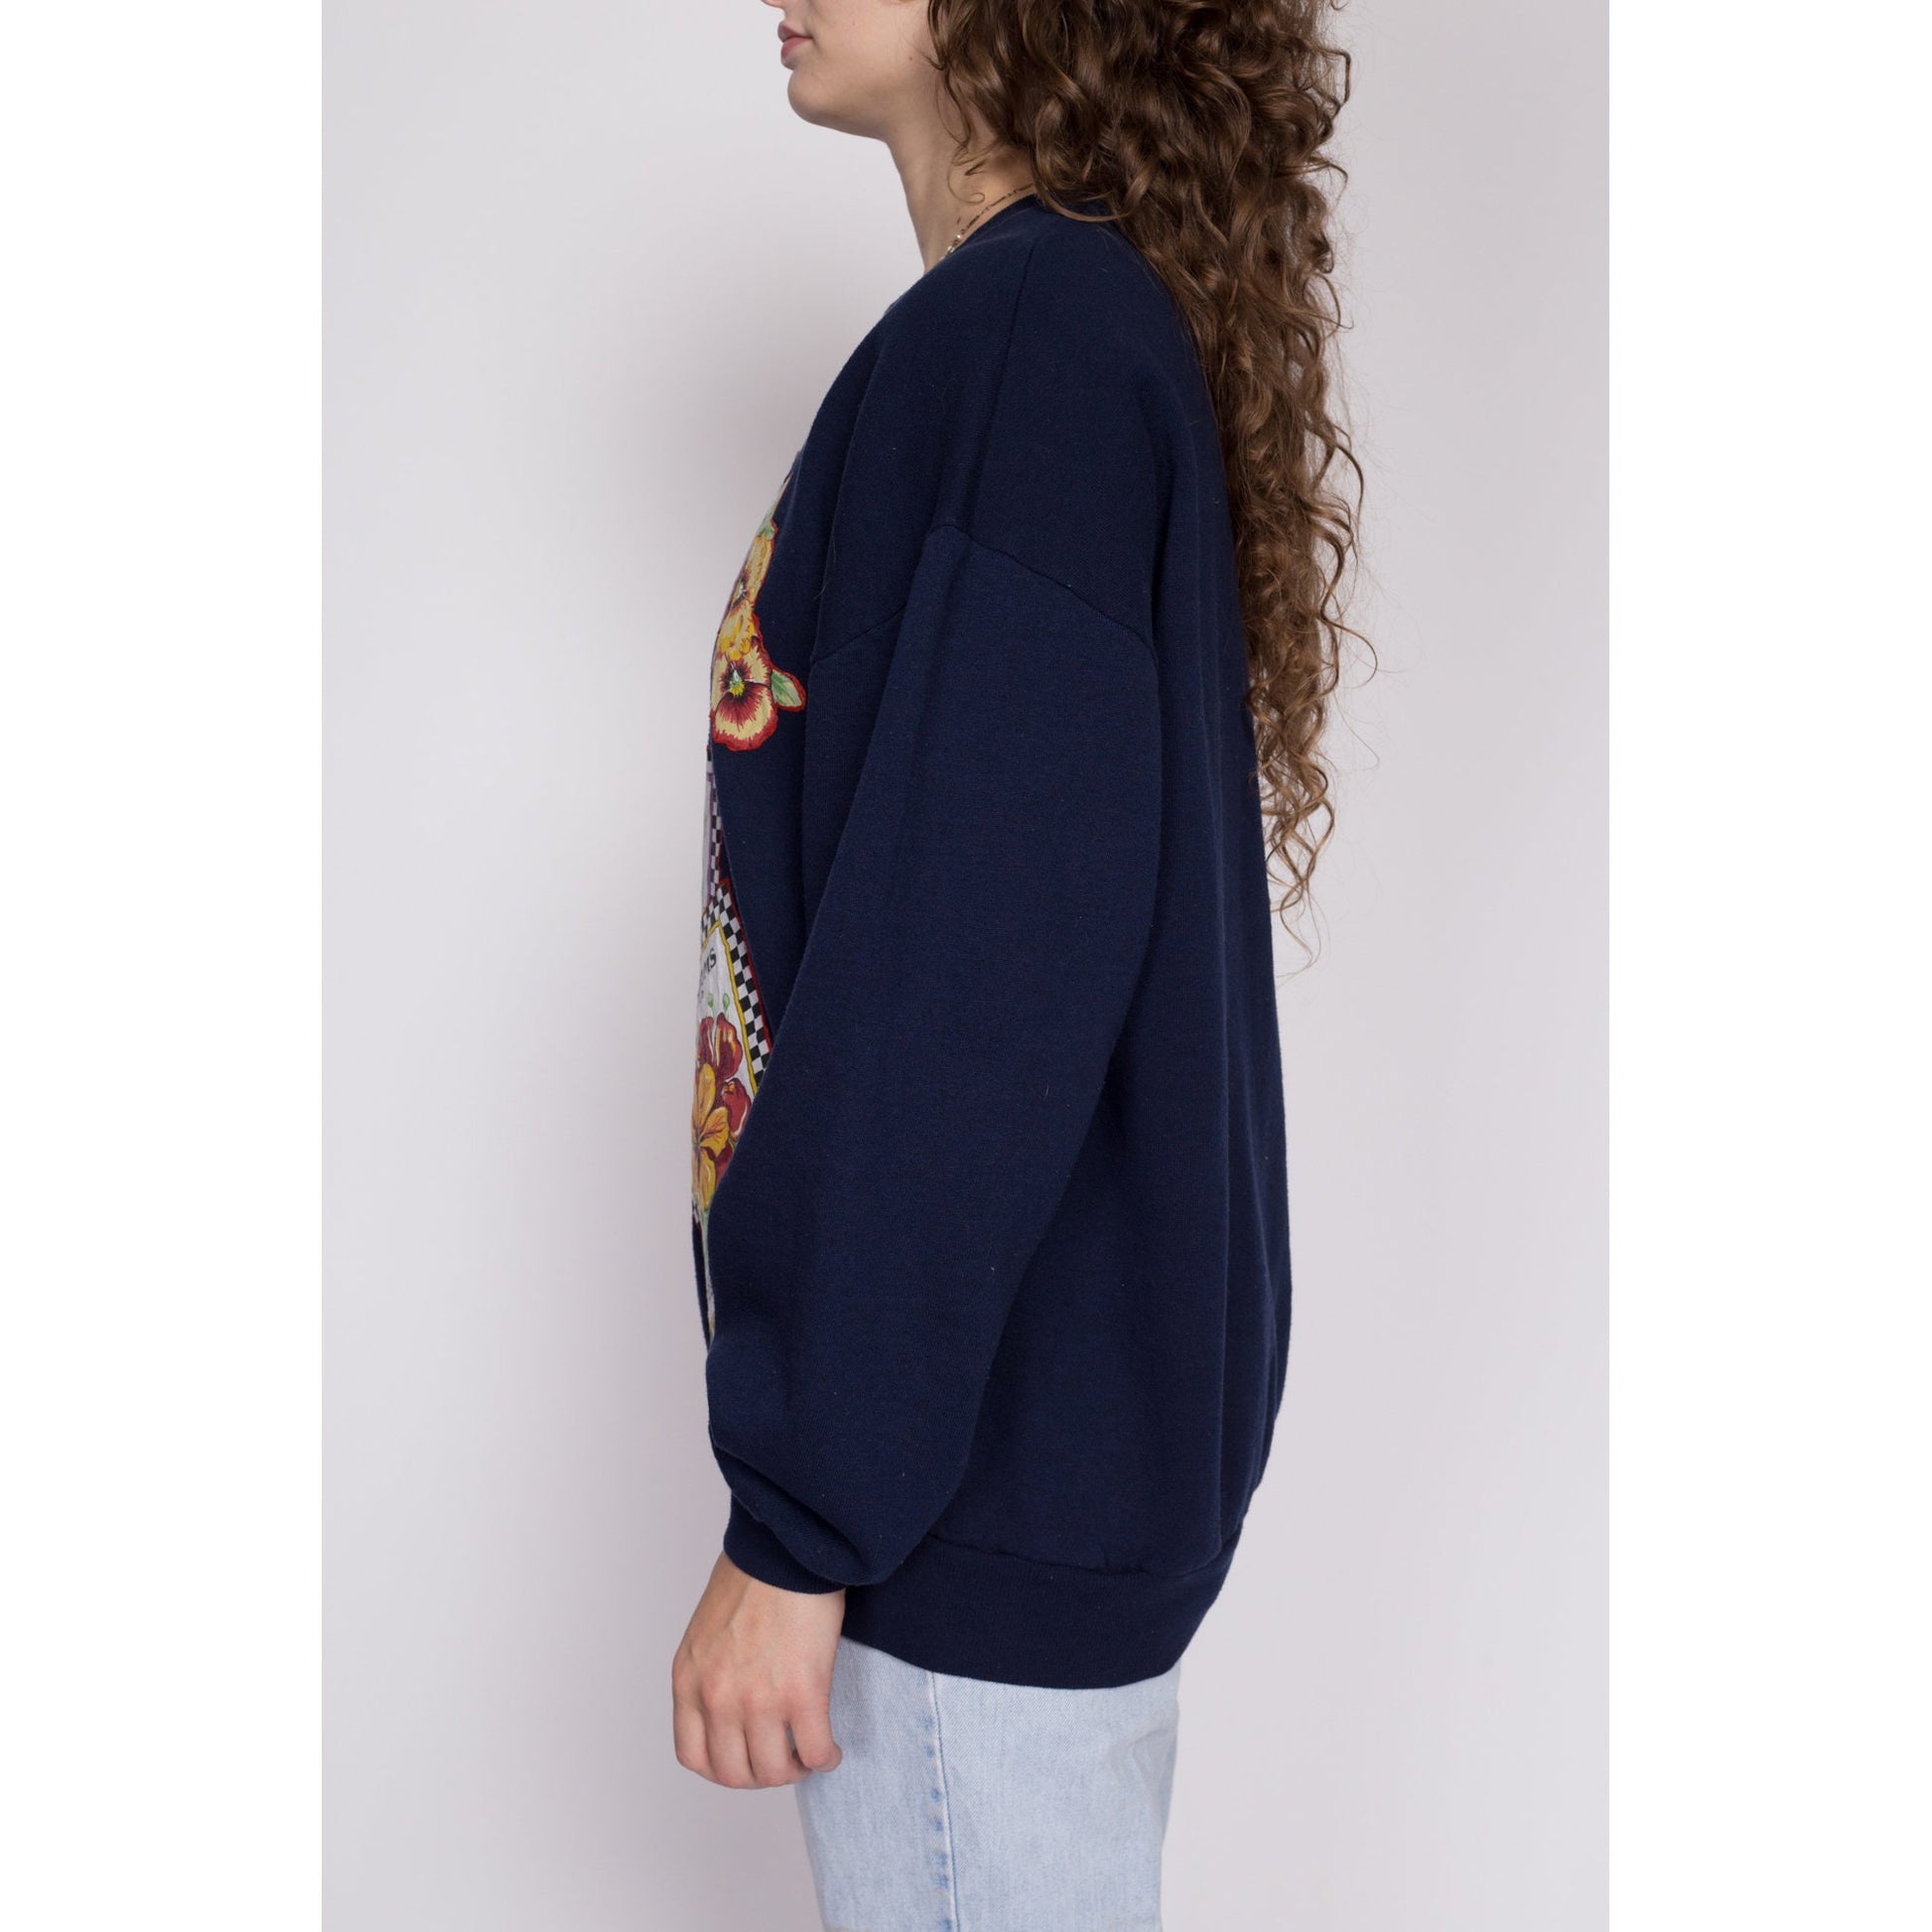 XL 90s Flower Seed Packets Graphic Sweatshirt | Vintage Navy Blue Floral Long Sleeve Crewneck